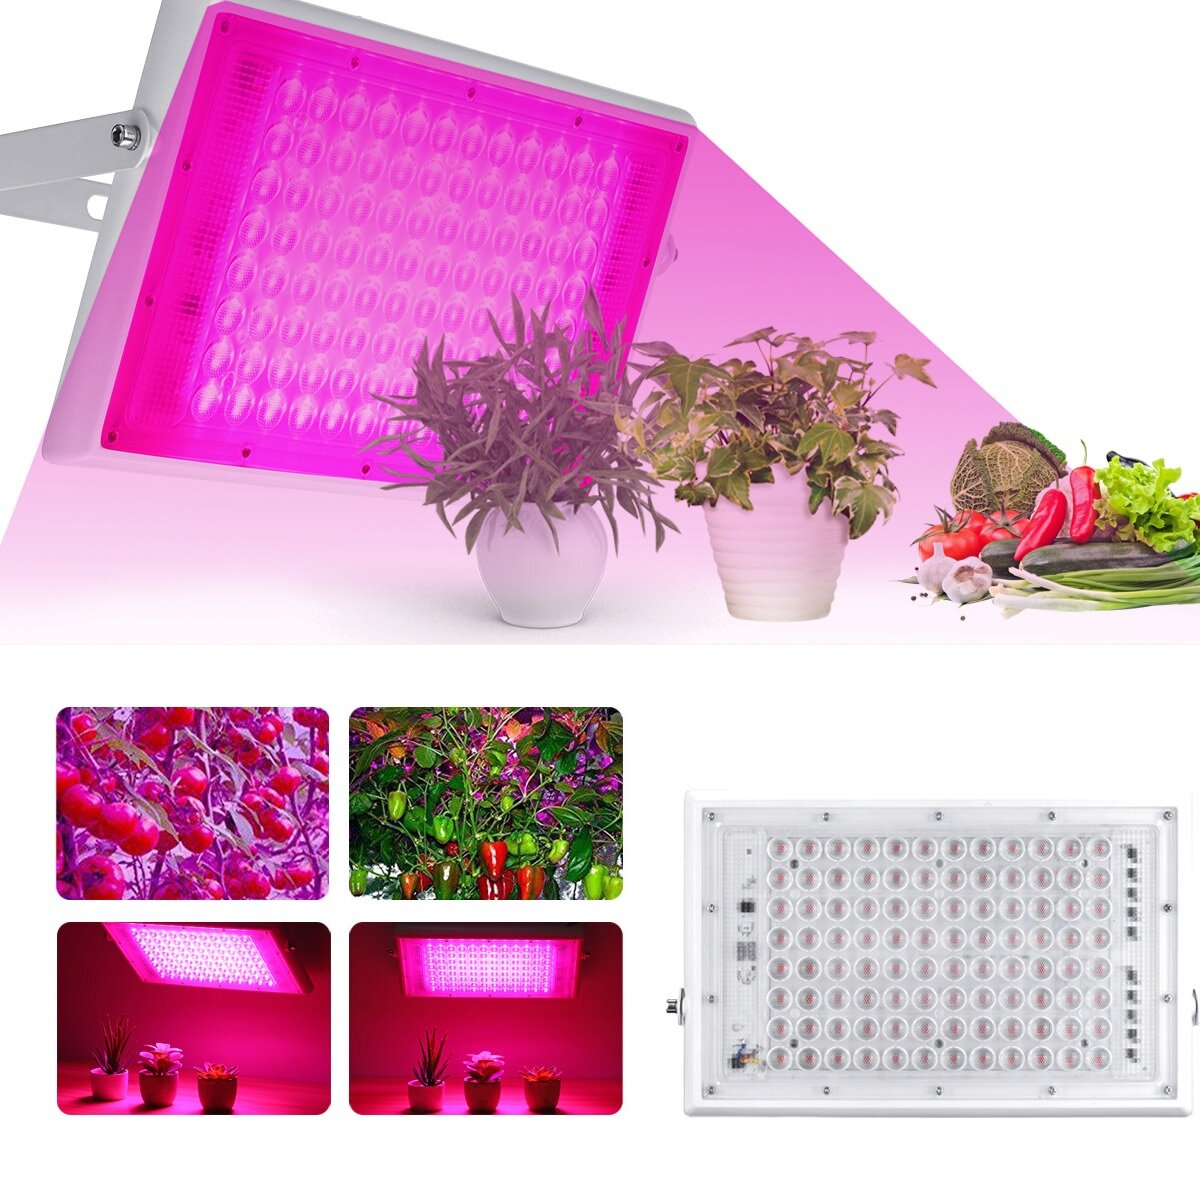 

100W Full Spectrum LED Grow Light Hydroponic Indoor Plant Growing Panel Lamp AC220V